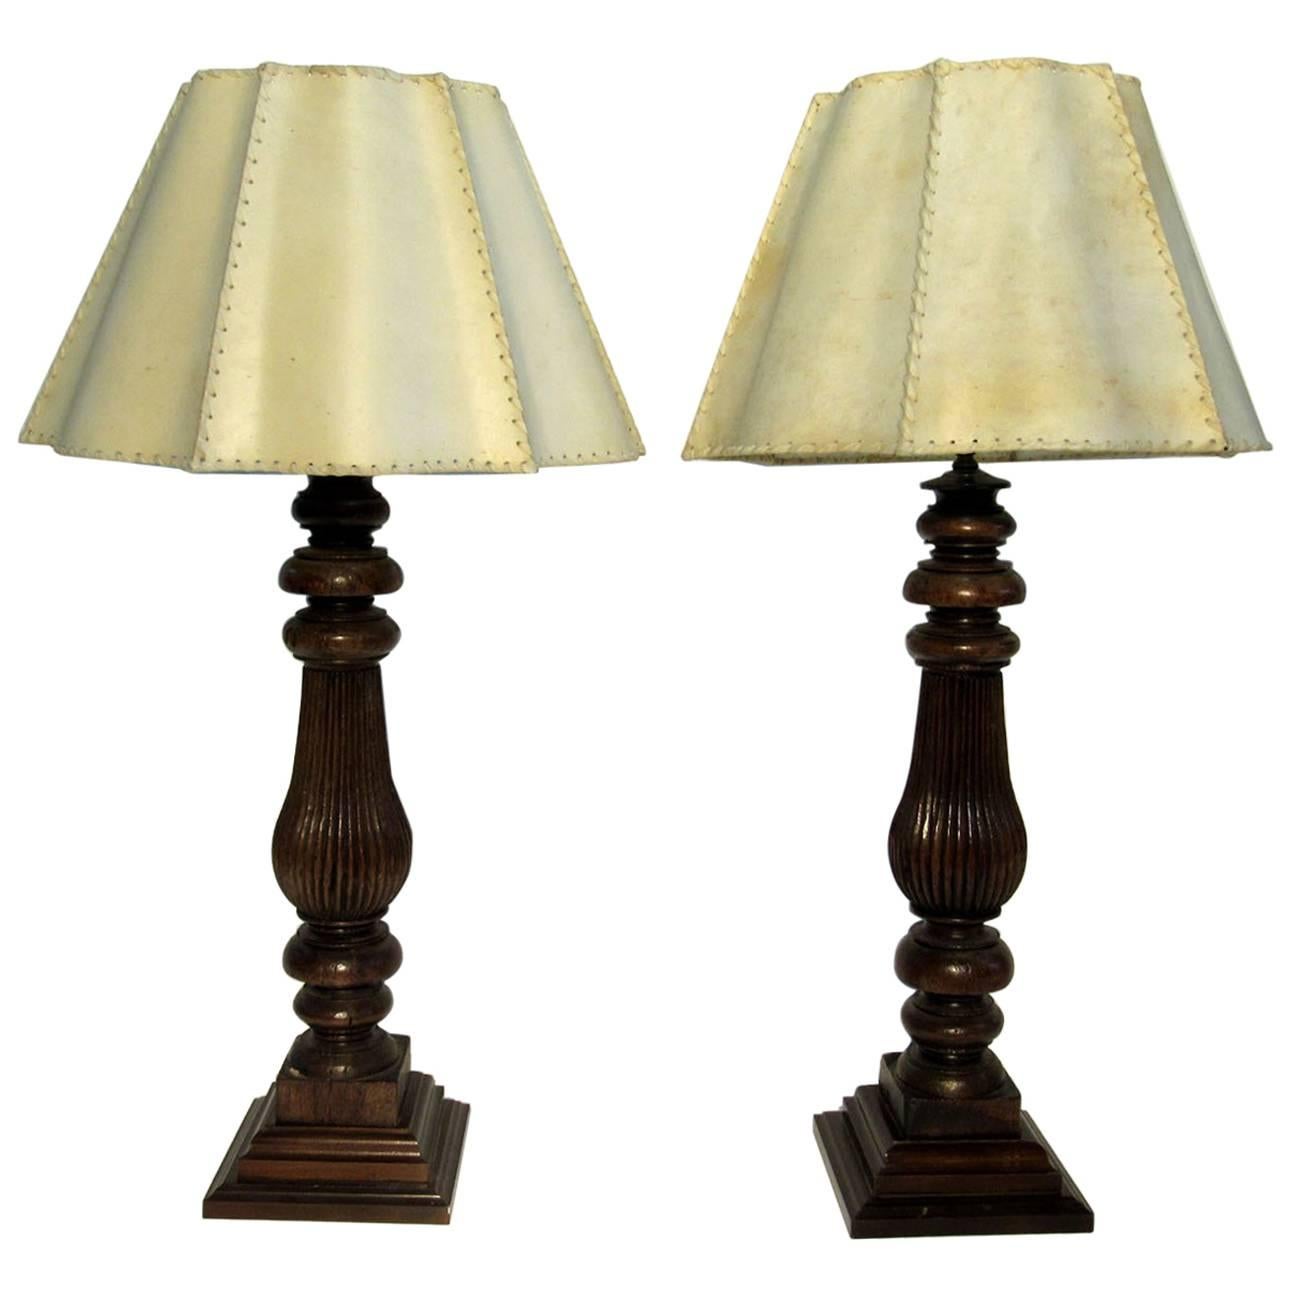 Late 19th Century Carved Wooden Lamps